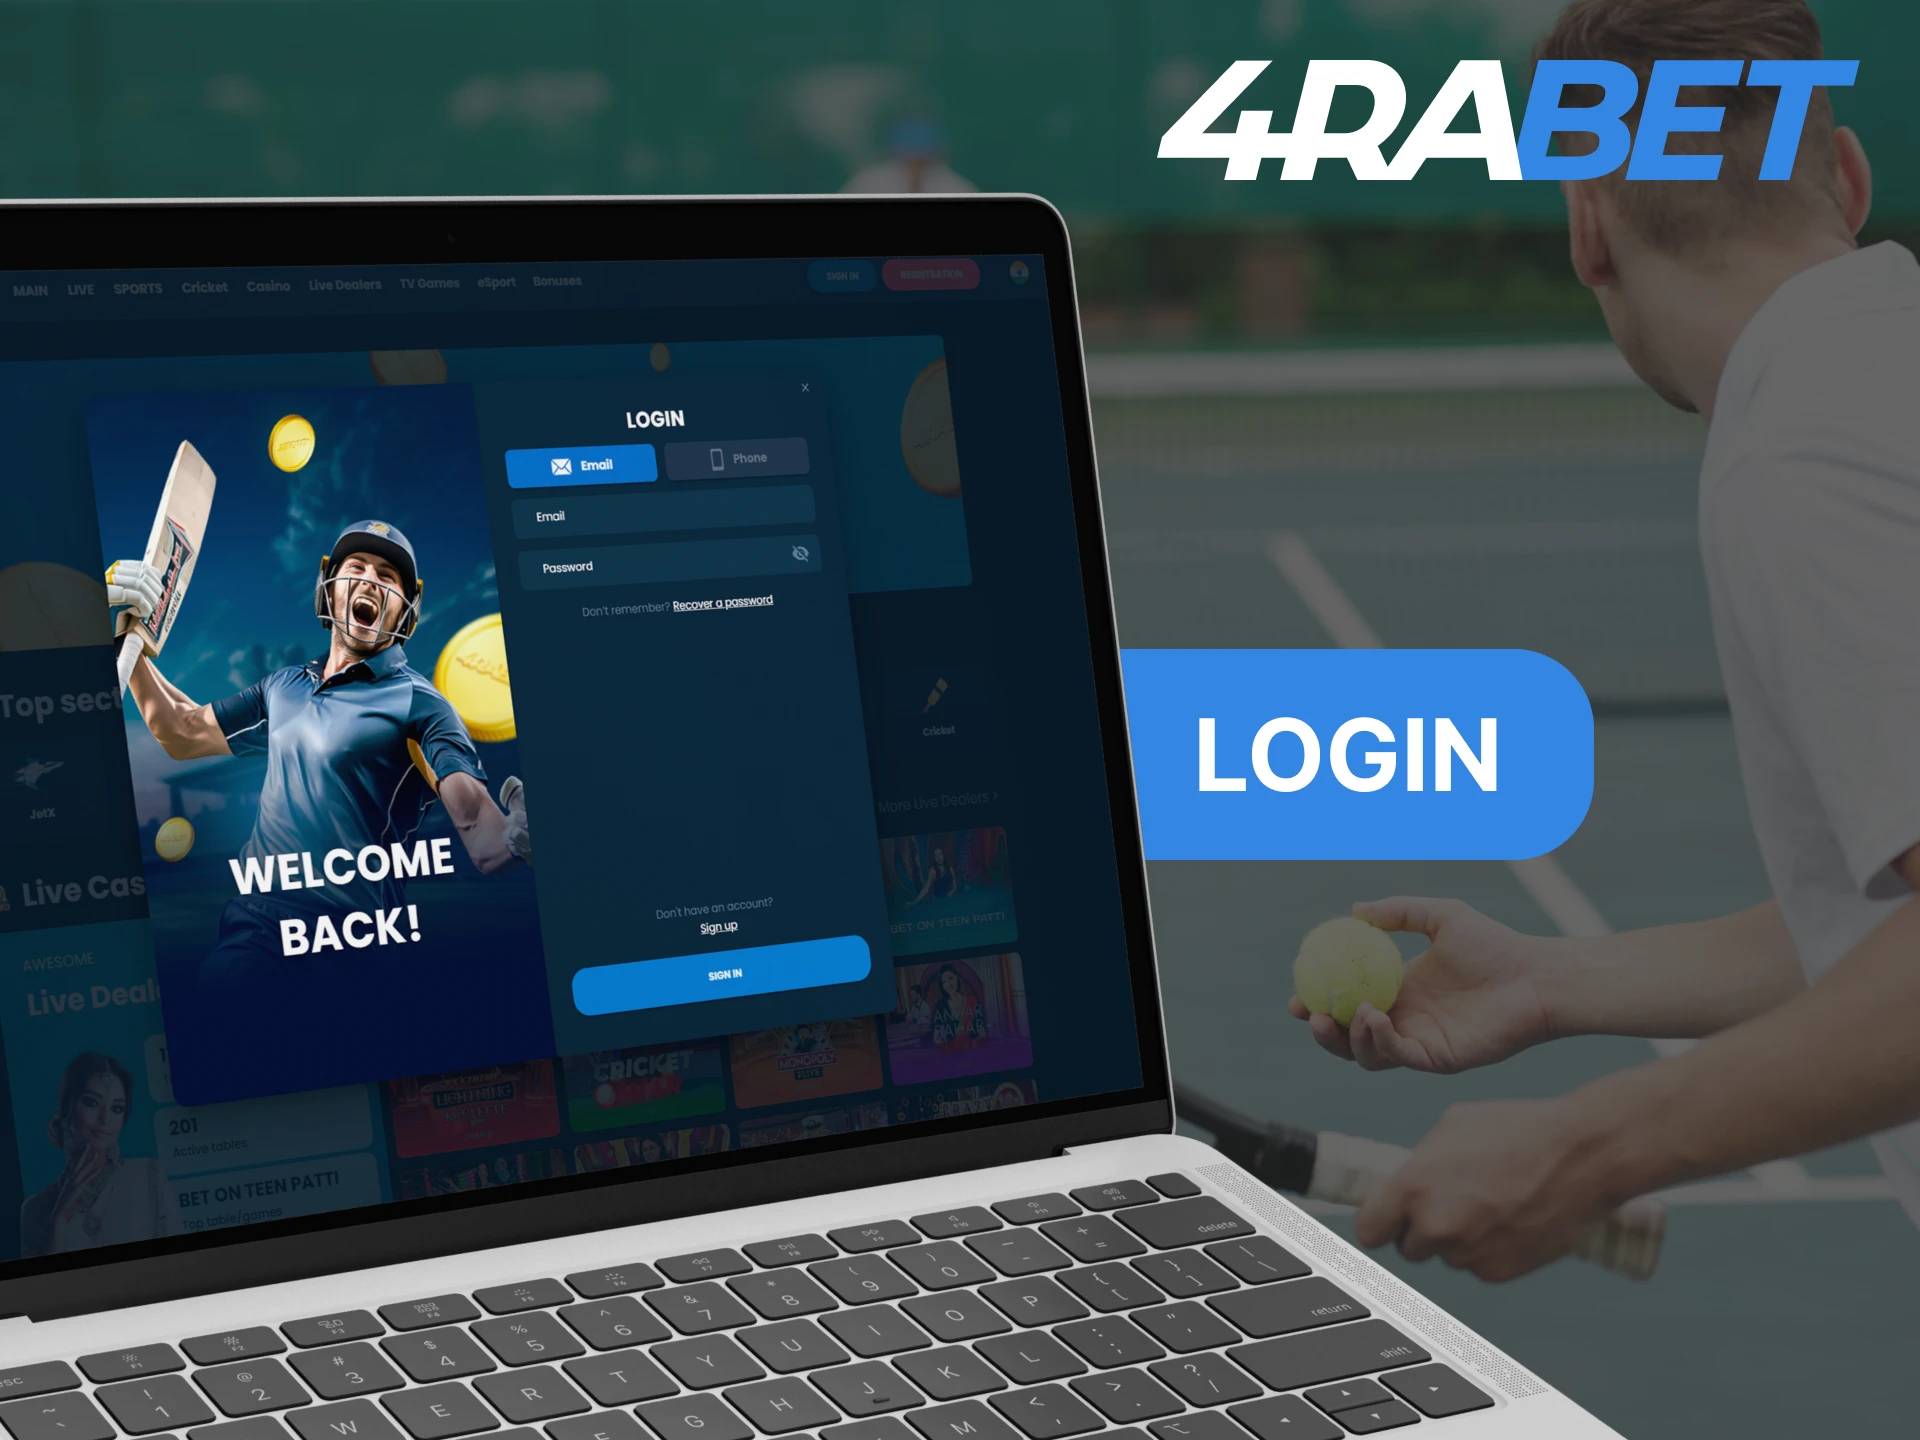 Login to your 4RaBet account to place bets and play at the casino.